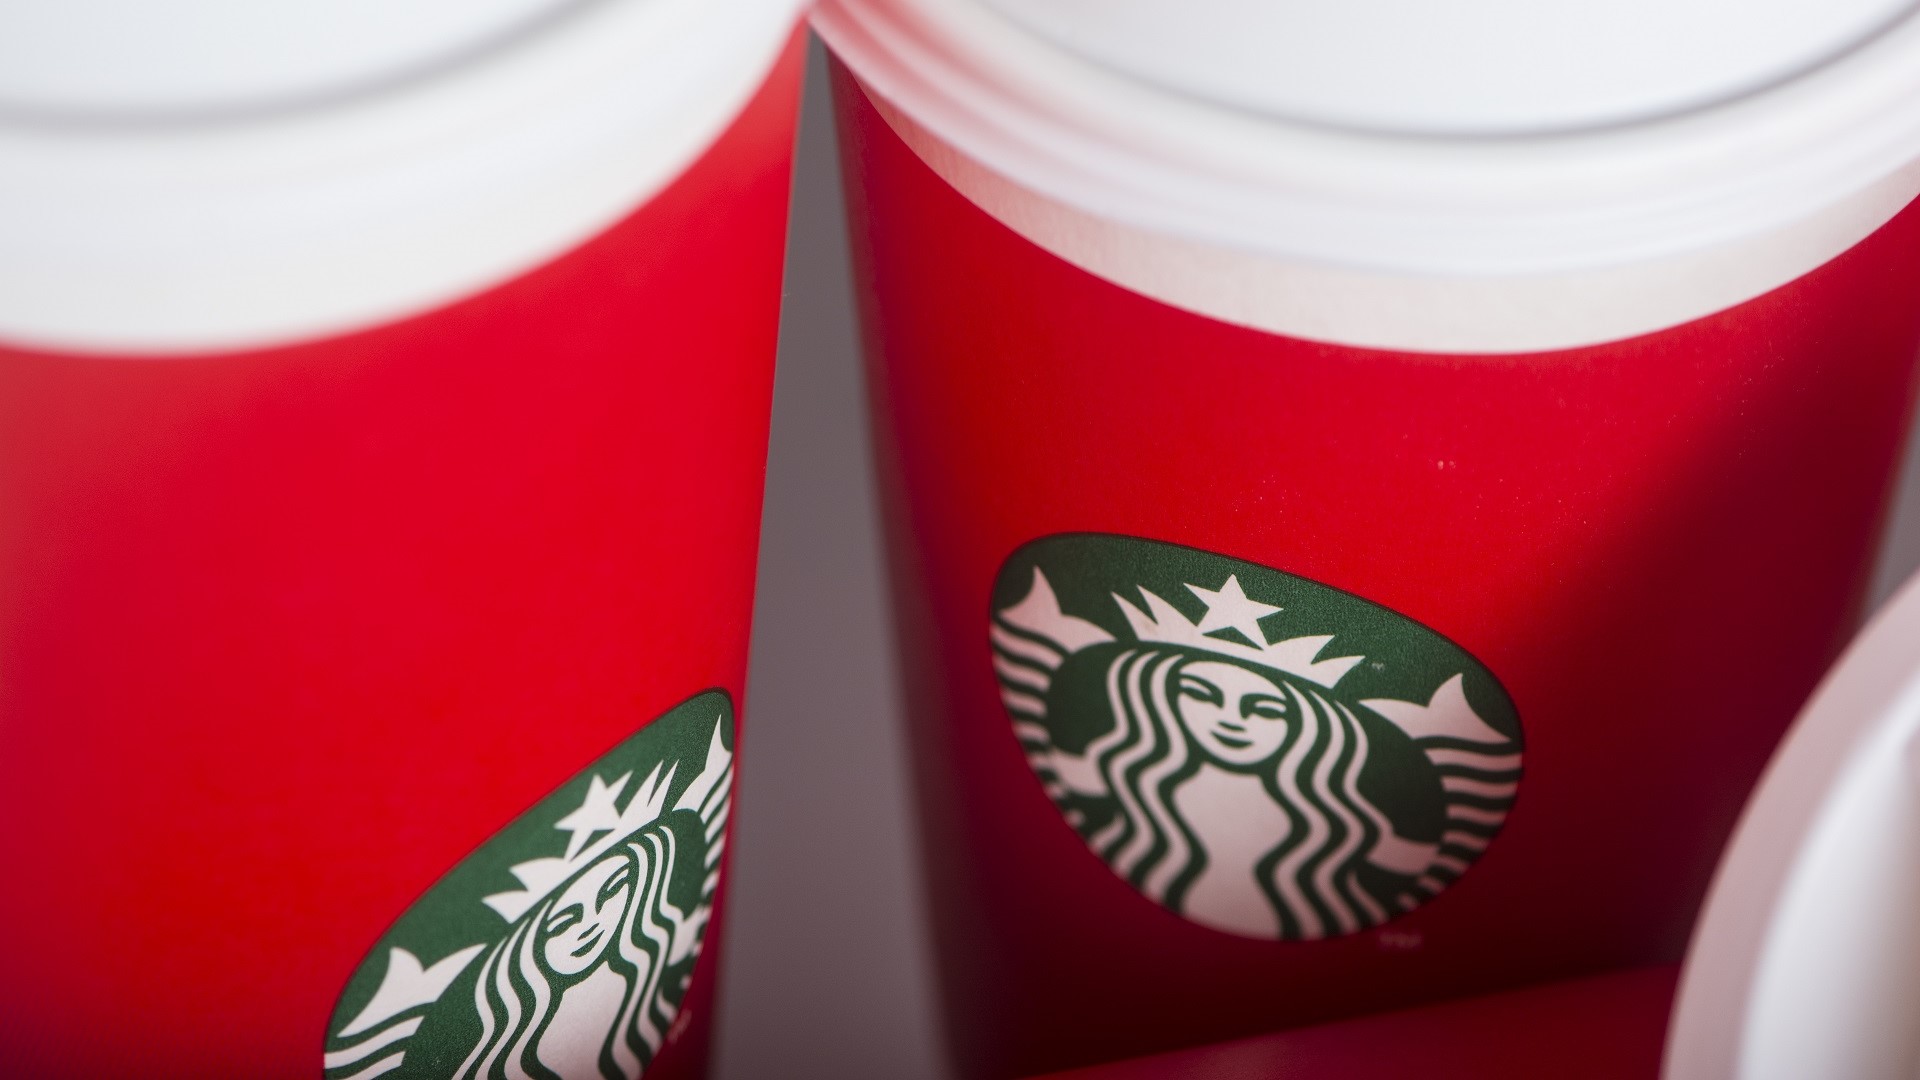 Starbucks Is Giving Away Free Reusable Red Cups on Thursday